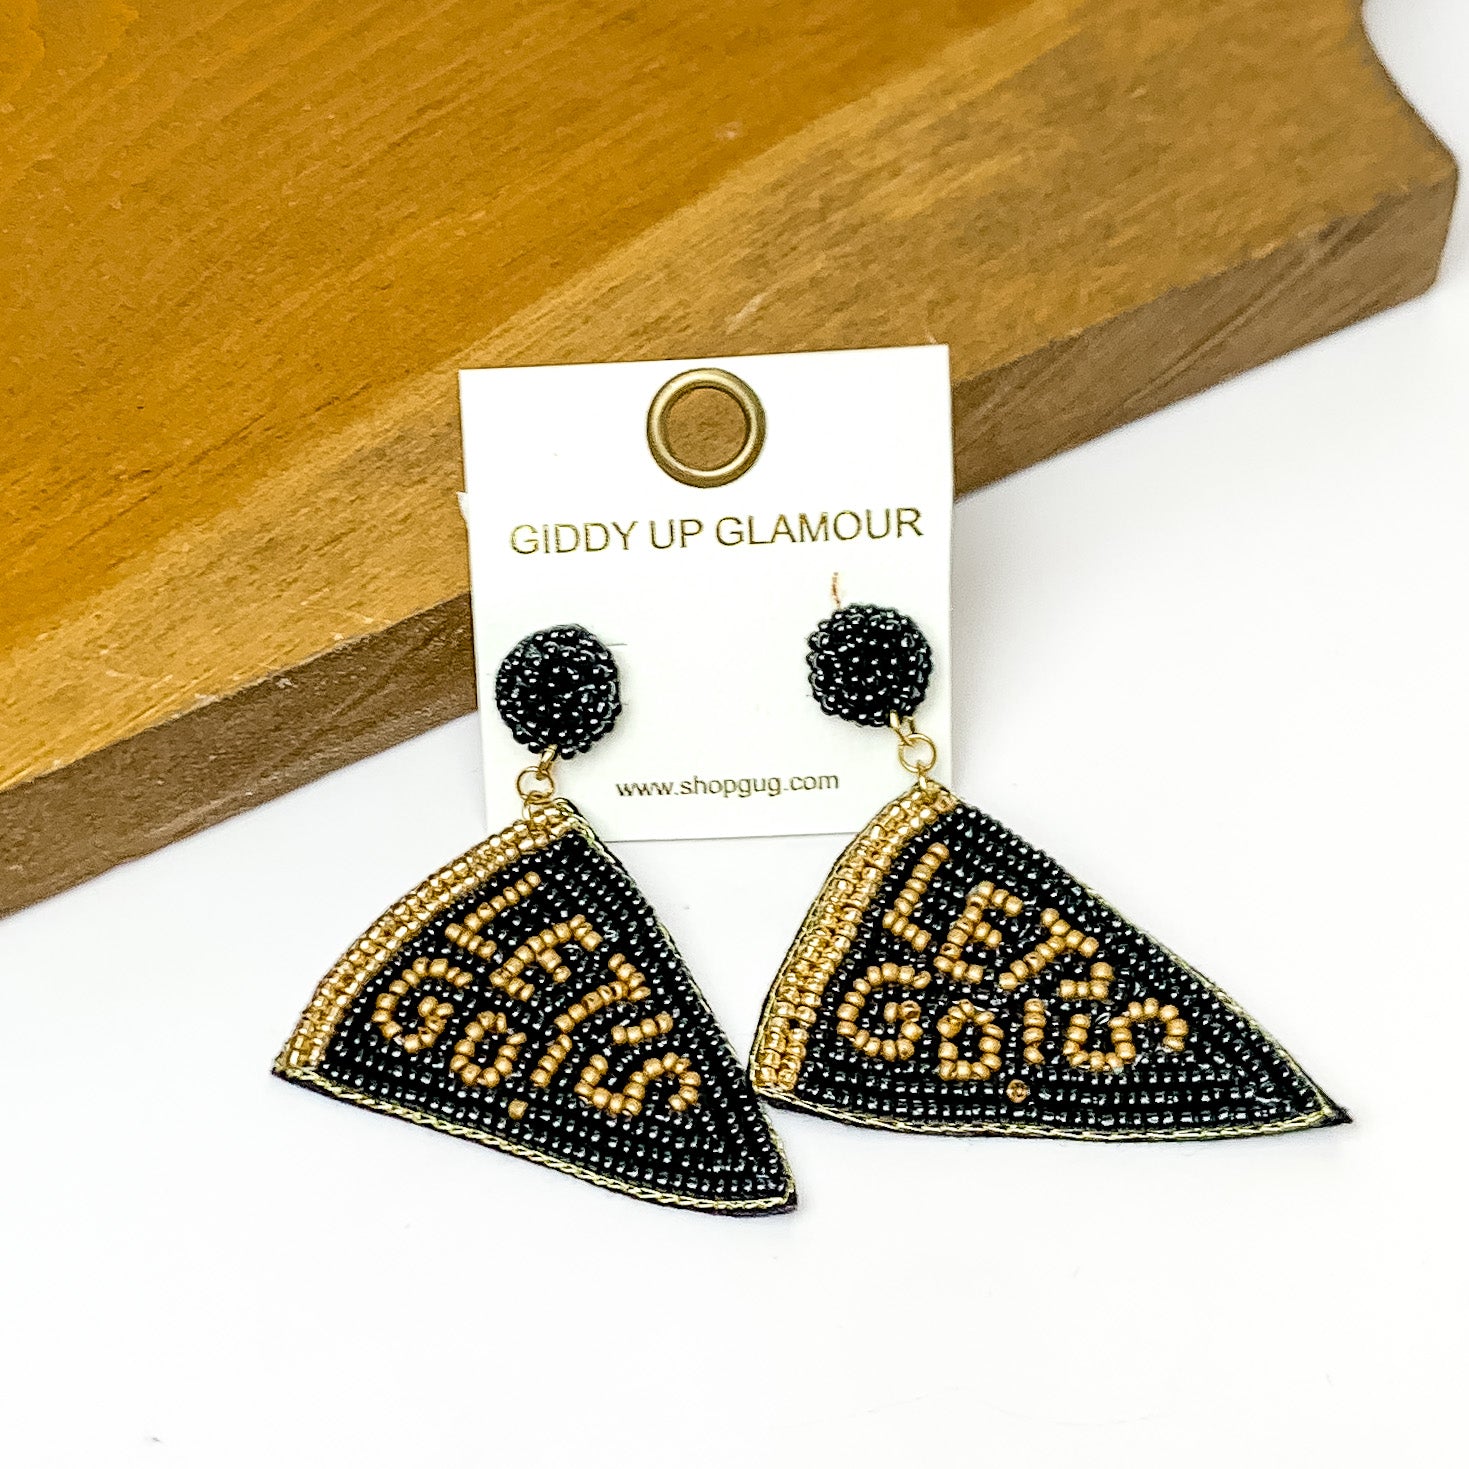 Lets Go Beaded Flag Earrings in black. Pictured on a white background with the earrings laying against a wood piece.